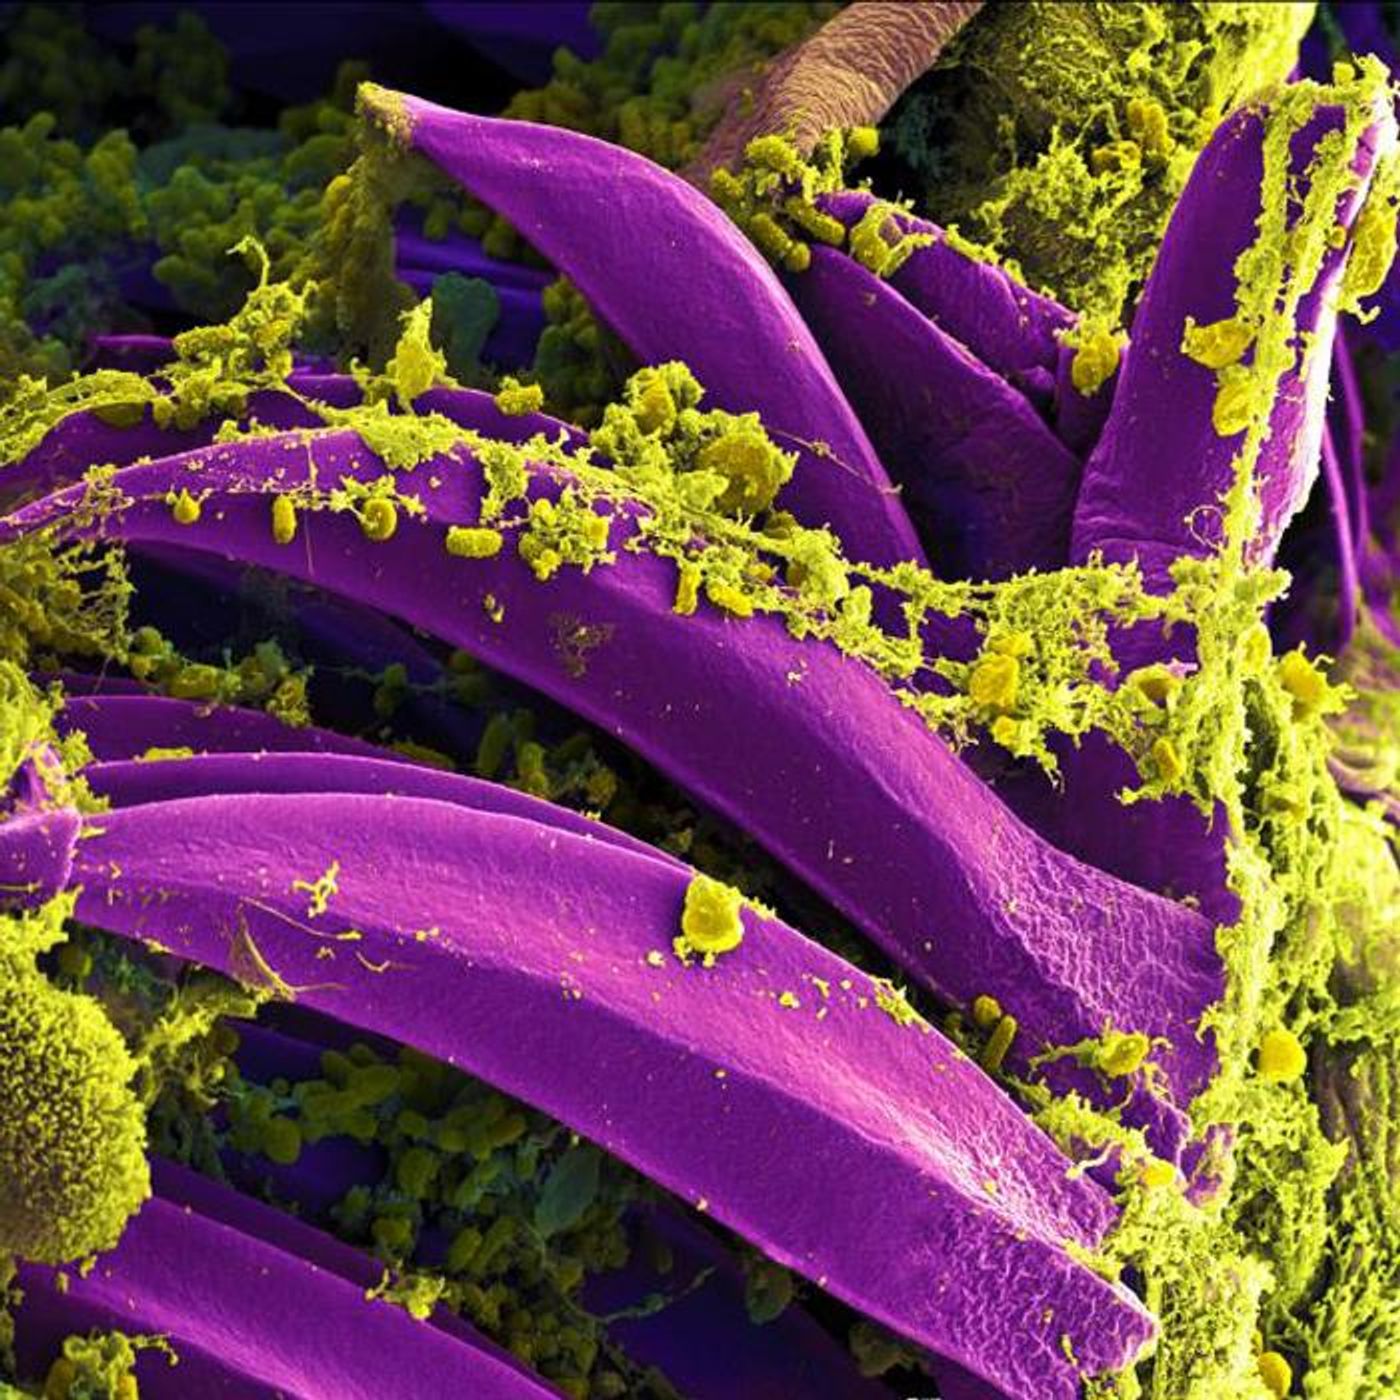 By National Institute of Allergy and Infectious Diseases (NIAID), this digitally colorized SEM image depicts yellow-colored, Yersinia pestis bacteria gathered on the spines of a flea. / Credit: NIAID